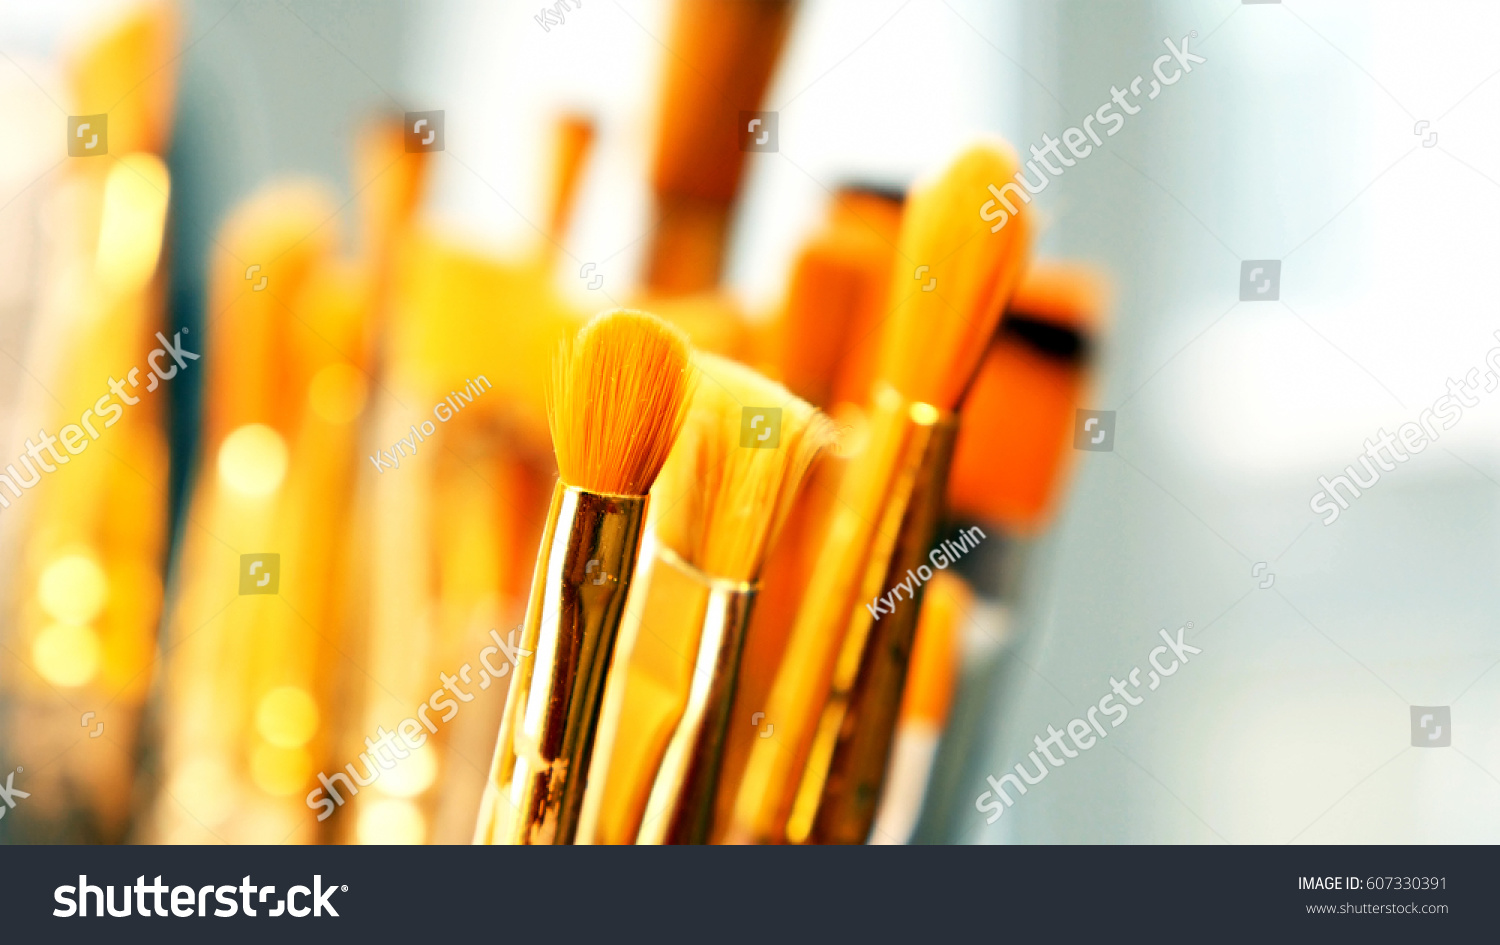 Artist paintbrushes. Set of different artist paint brushes in old crock close-up. Art studio concept. Selective focus footage with shallow DOF. #607330391